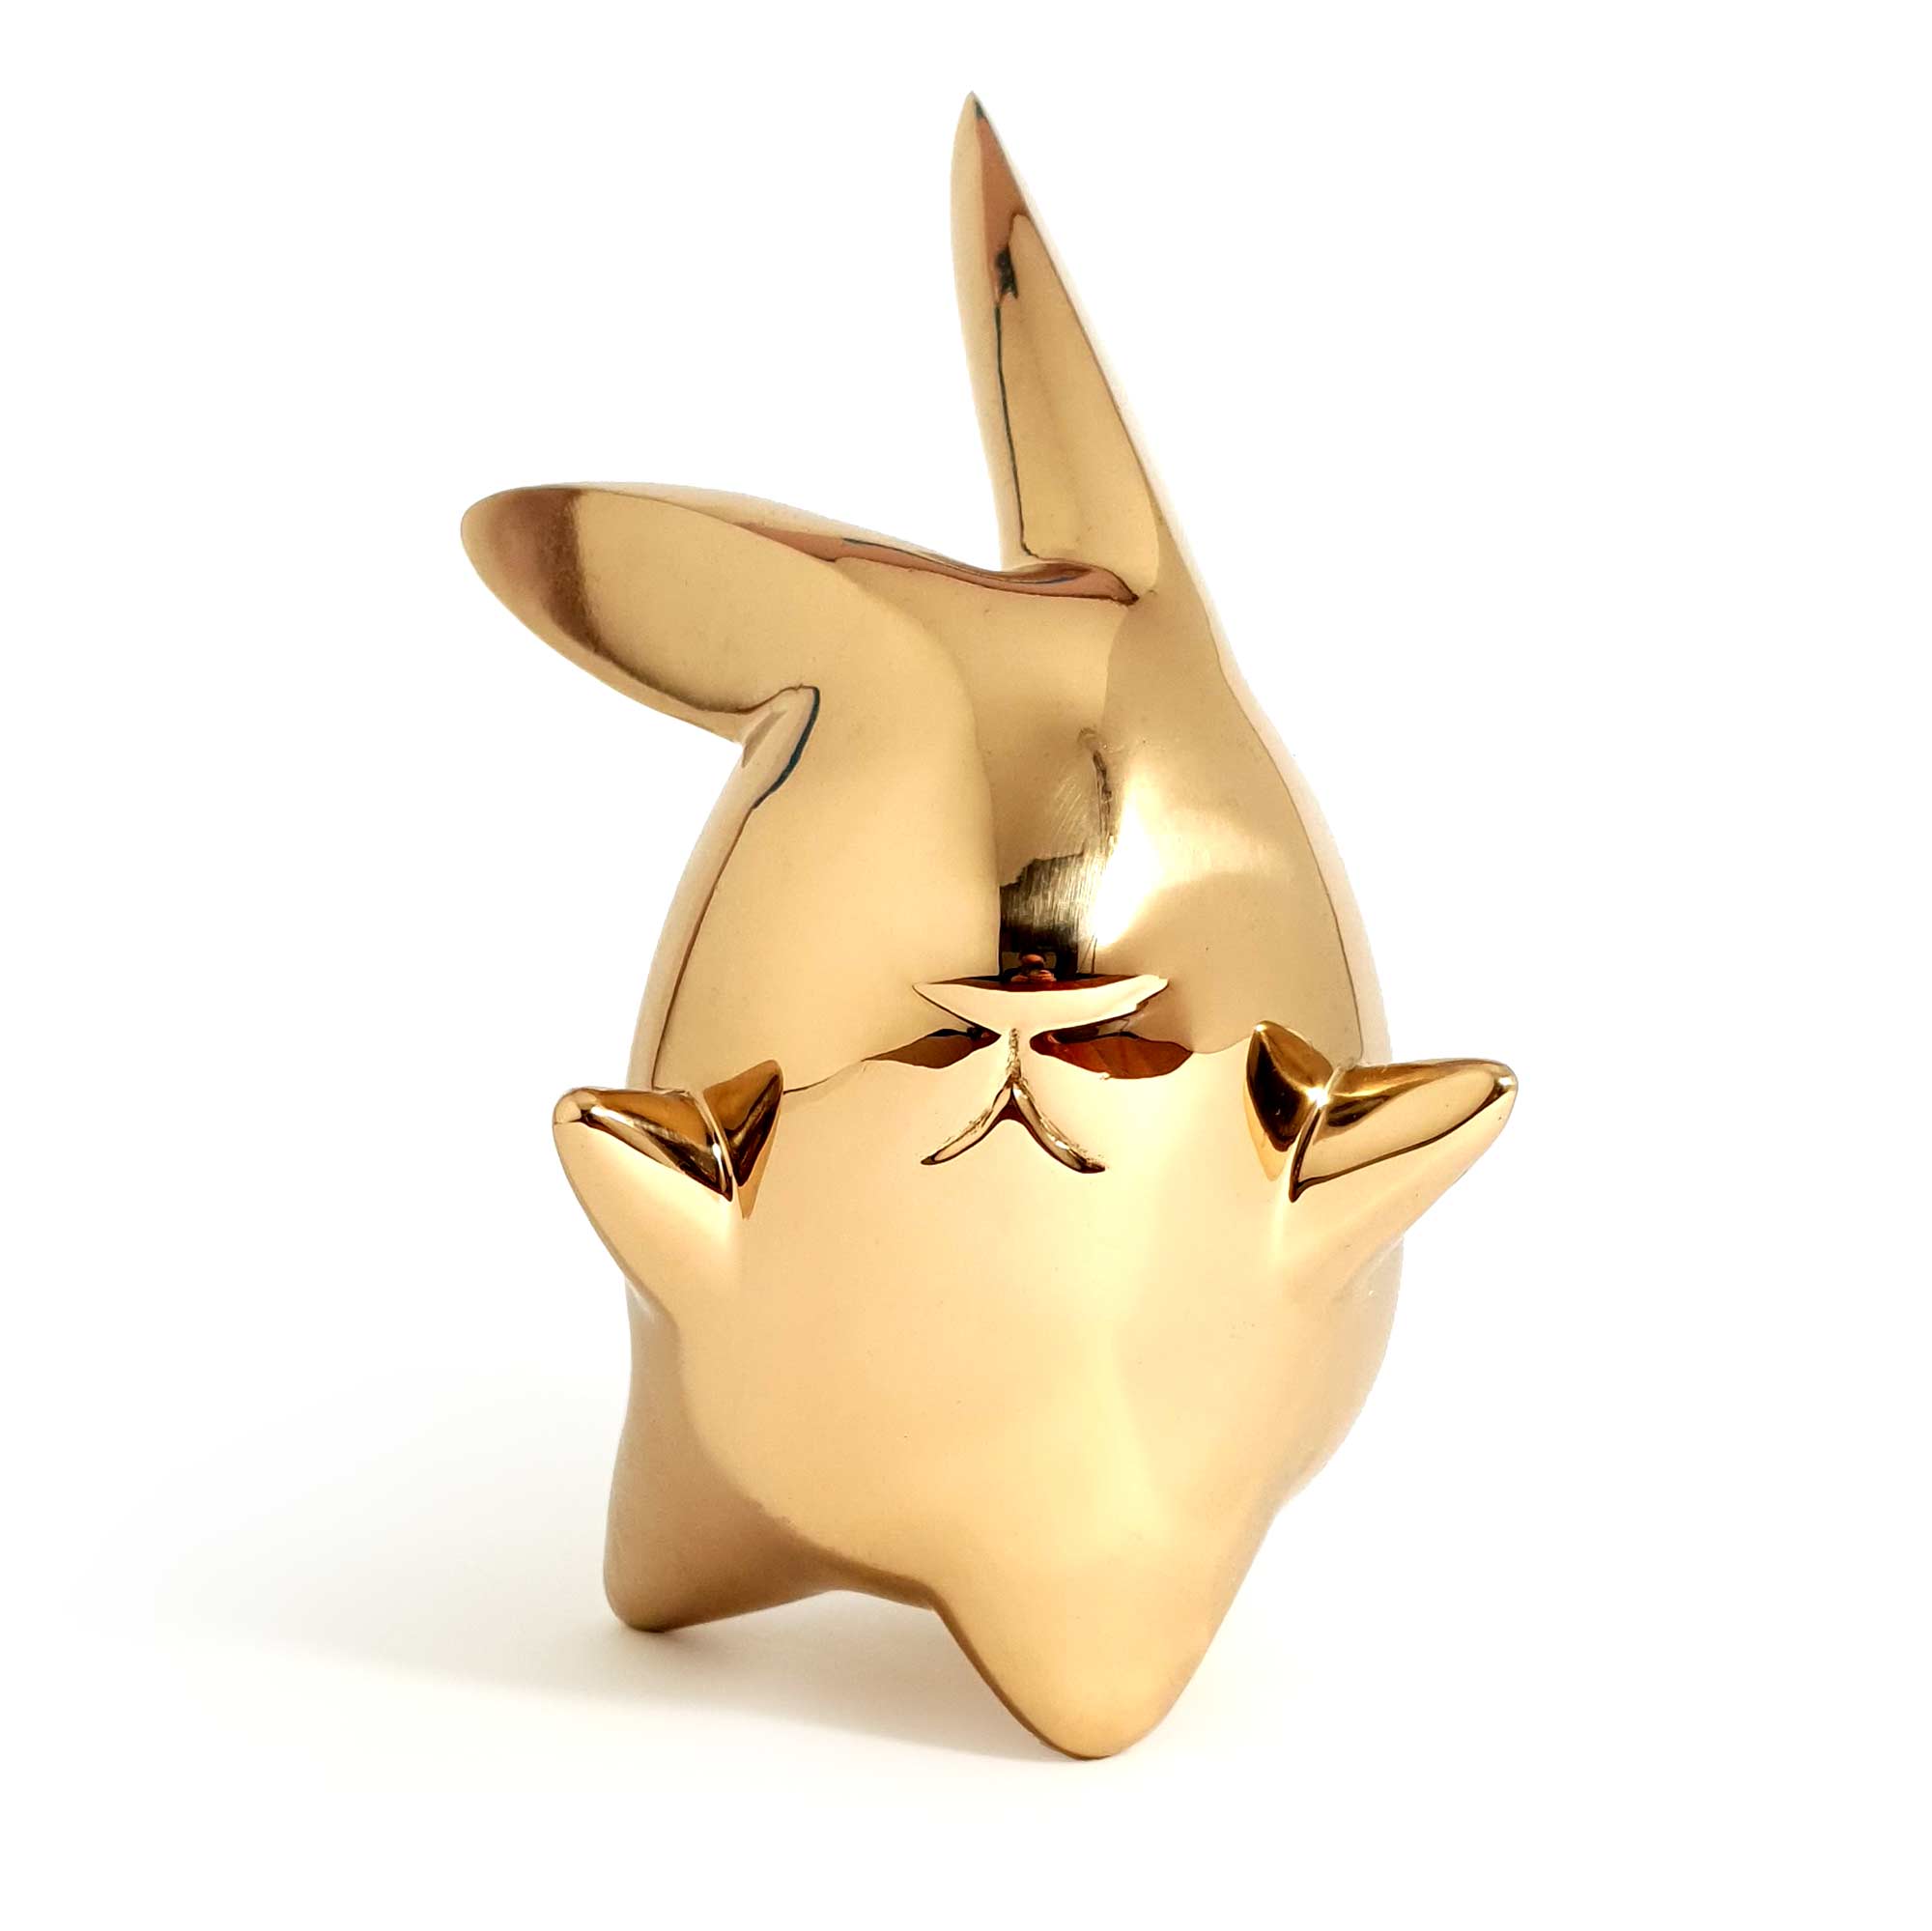 Flight or Fight, bunny rabbit sculpture, gold Mirror Polished Stainless Steel Sculpture, by artist Ferdi B Dick, front